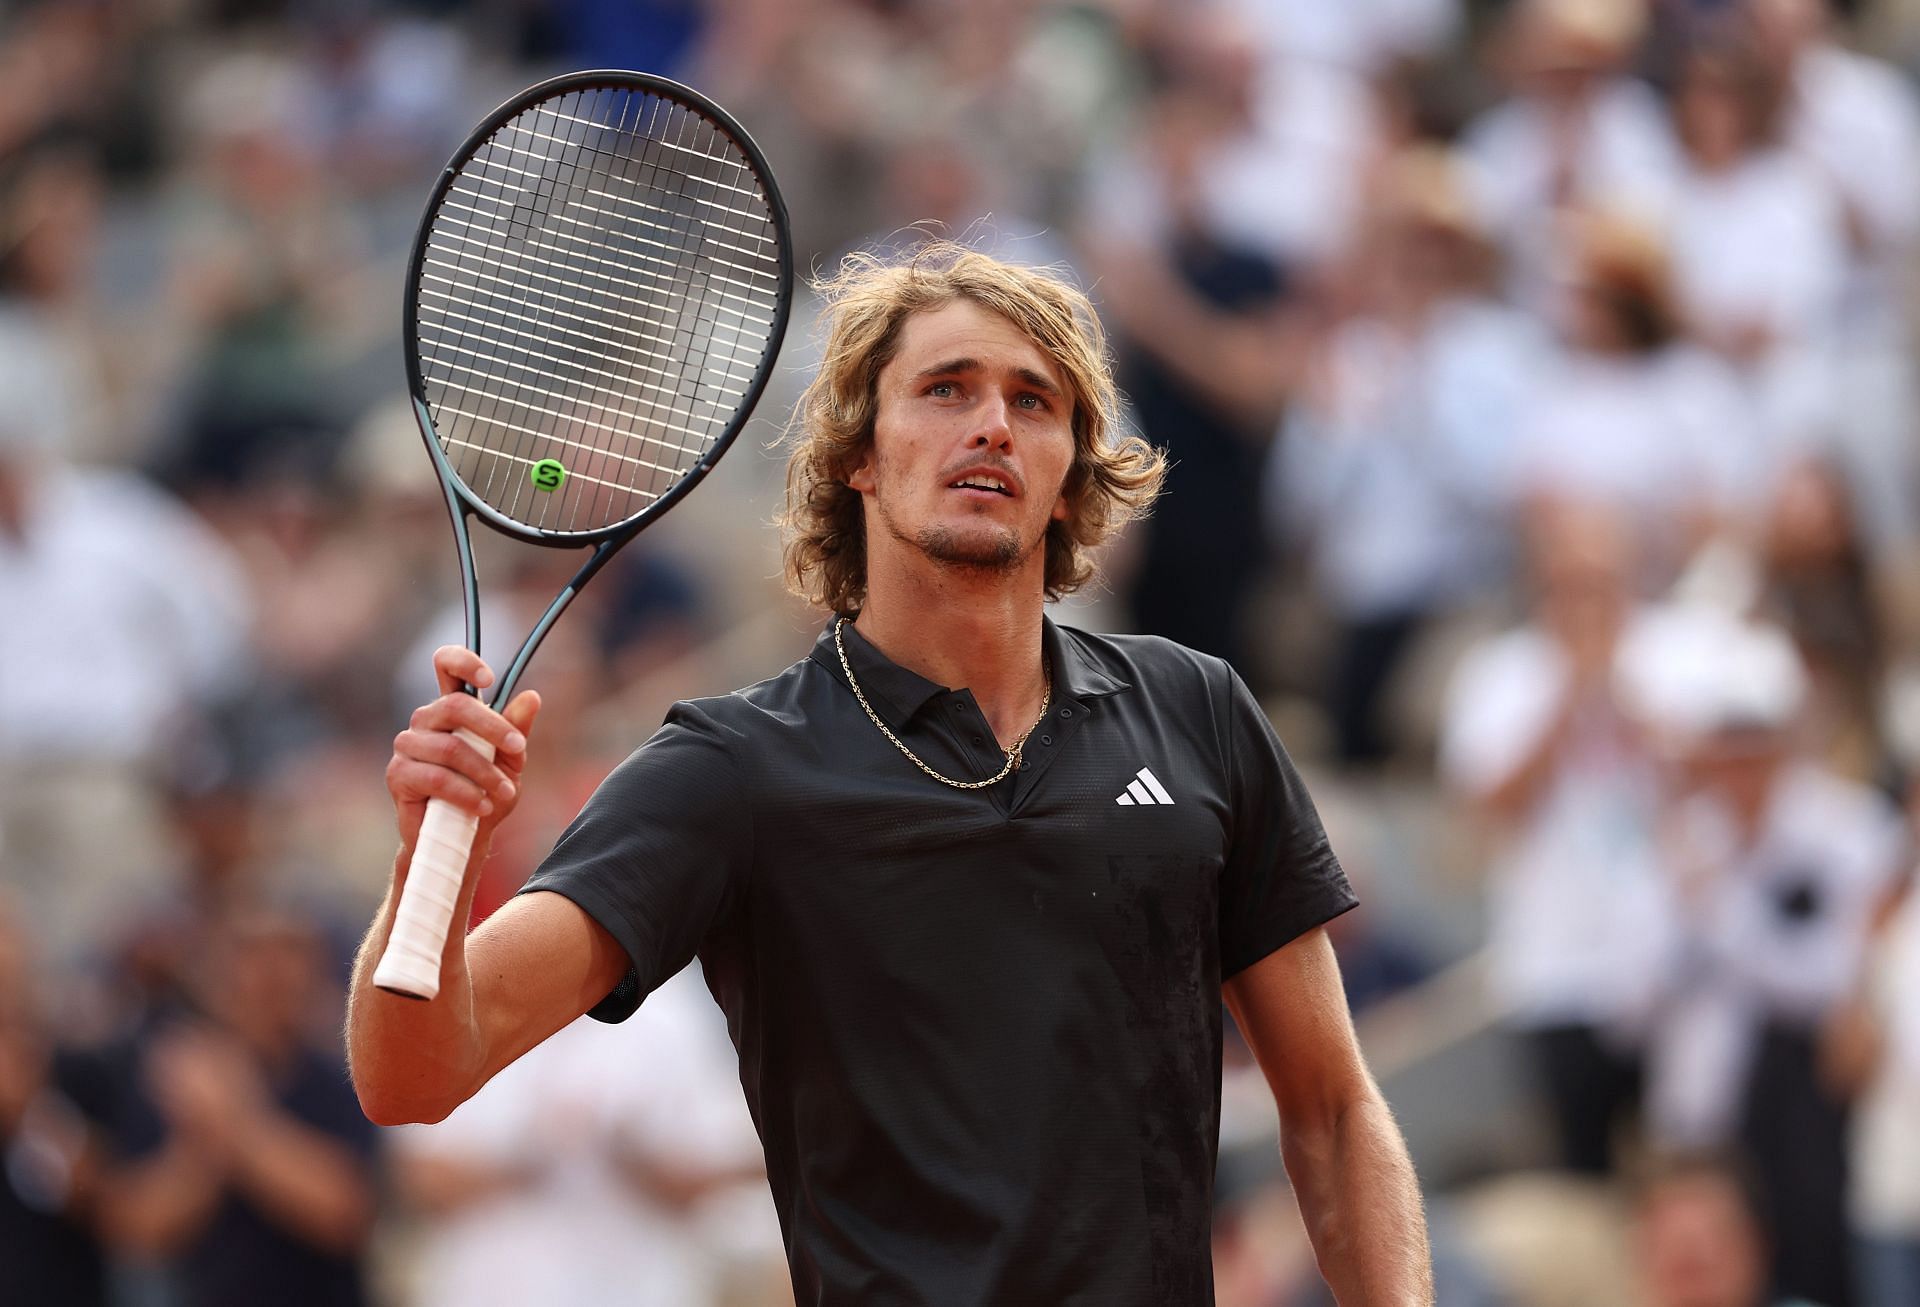 Alexander Zverev at the French Open